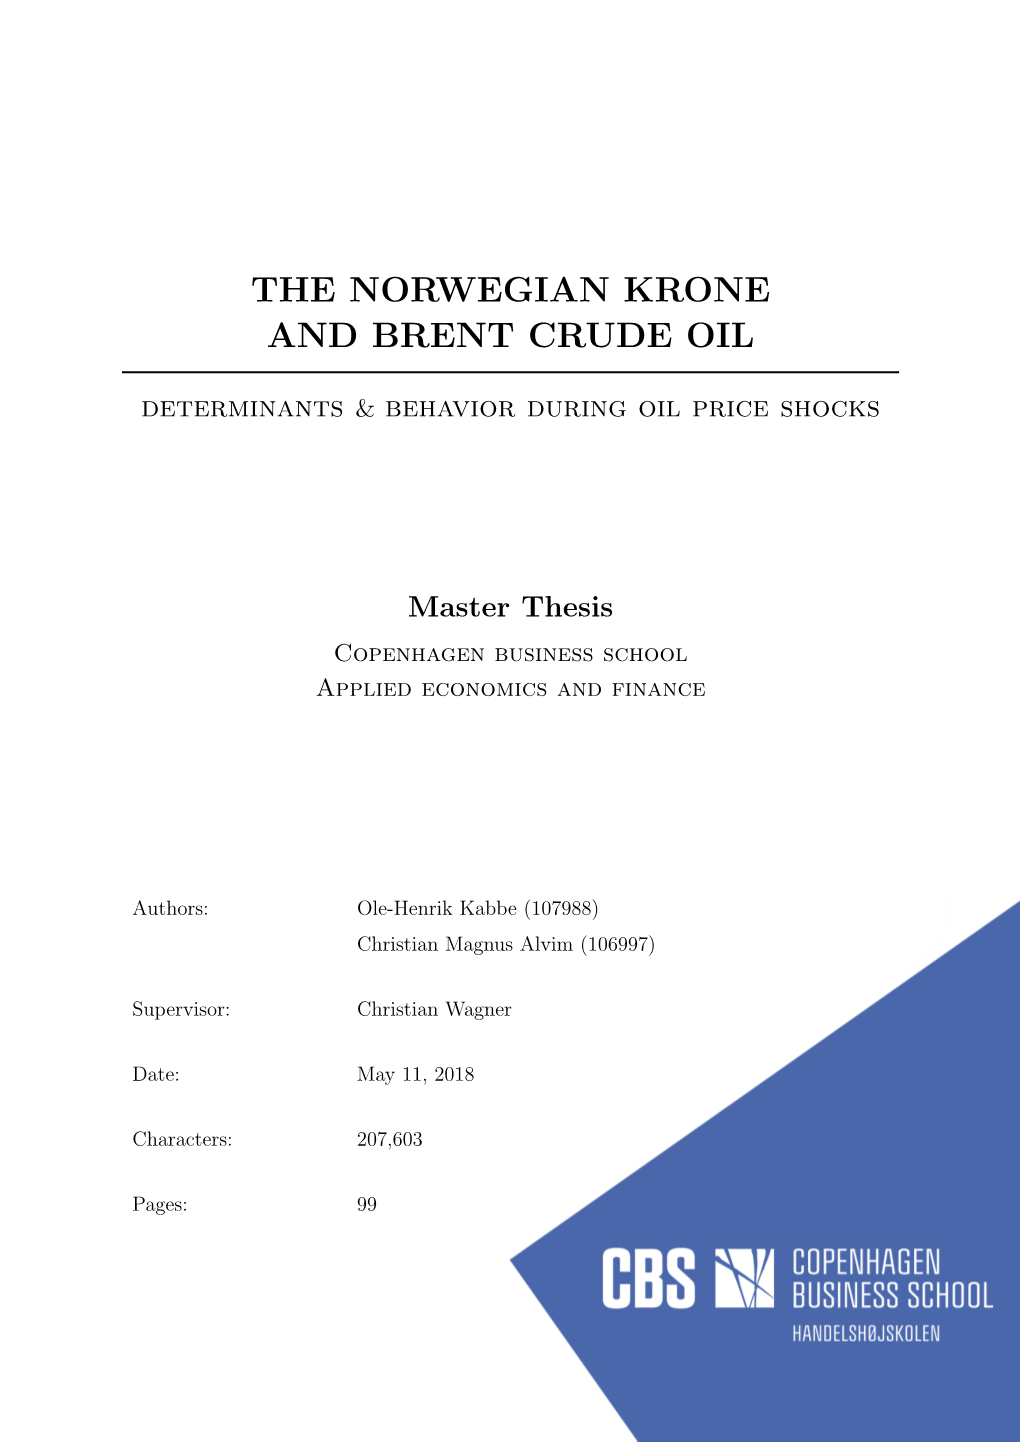 The Norwegian Krone and Brent Crude Oil